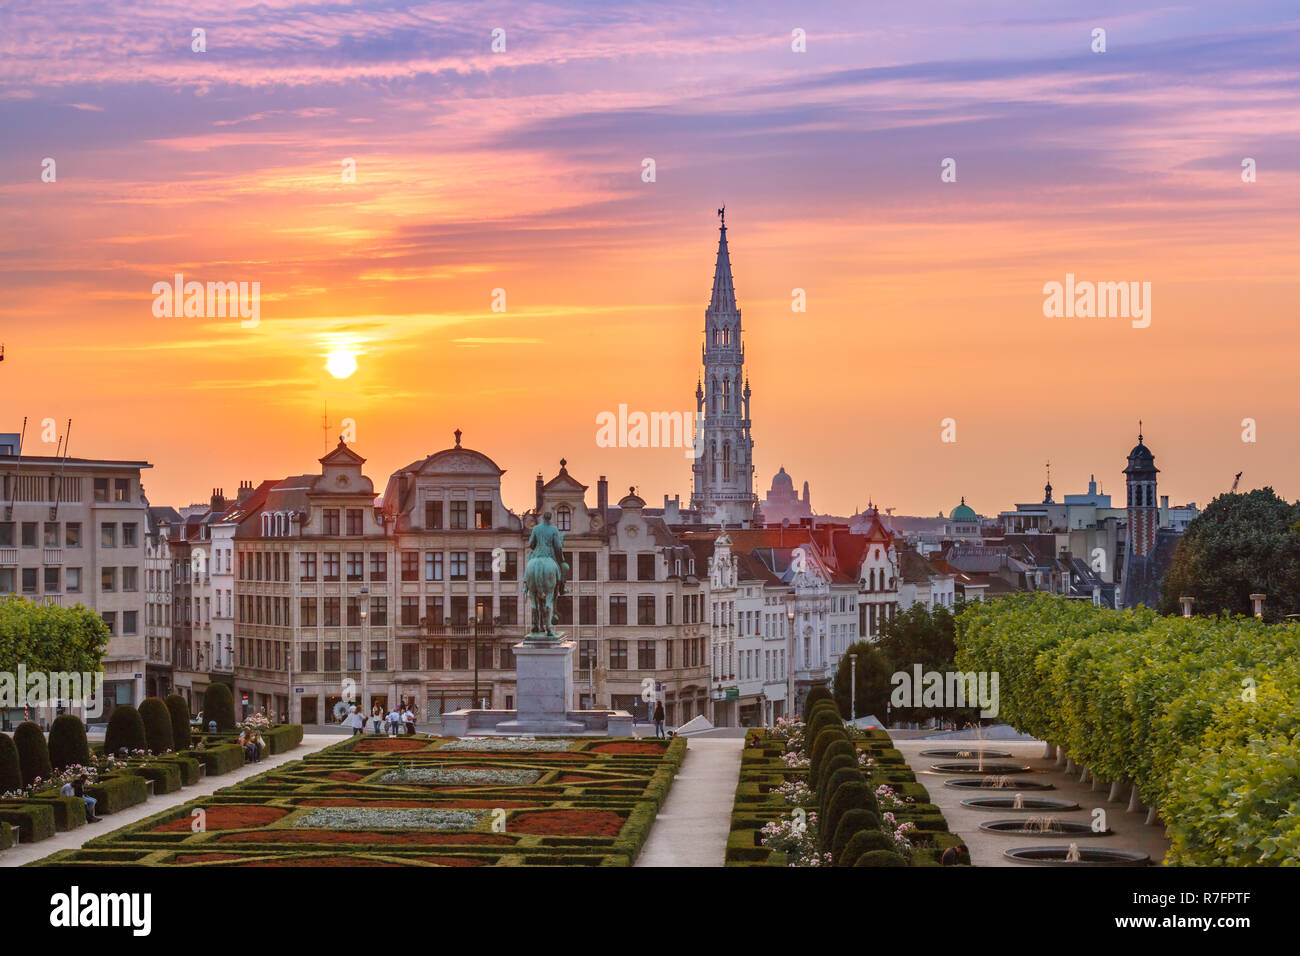 Brussels at sunset, Brussels, Belgium Stock Photo